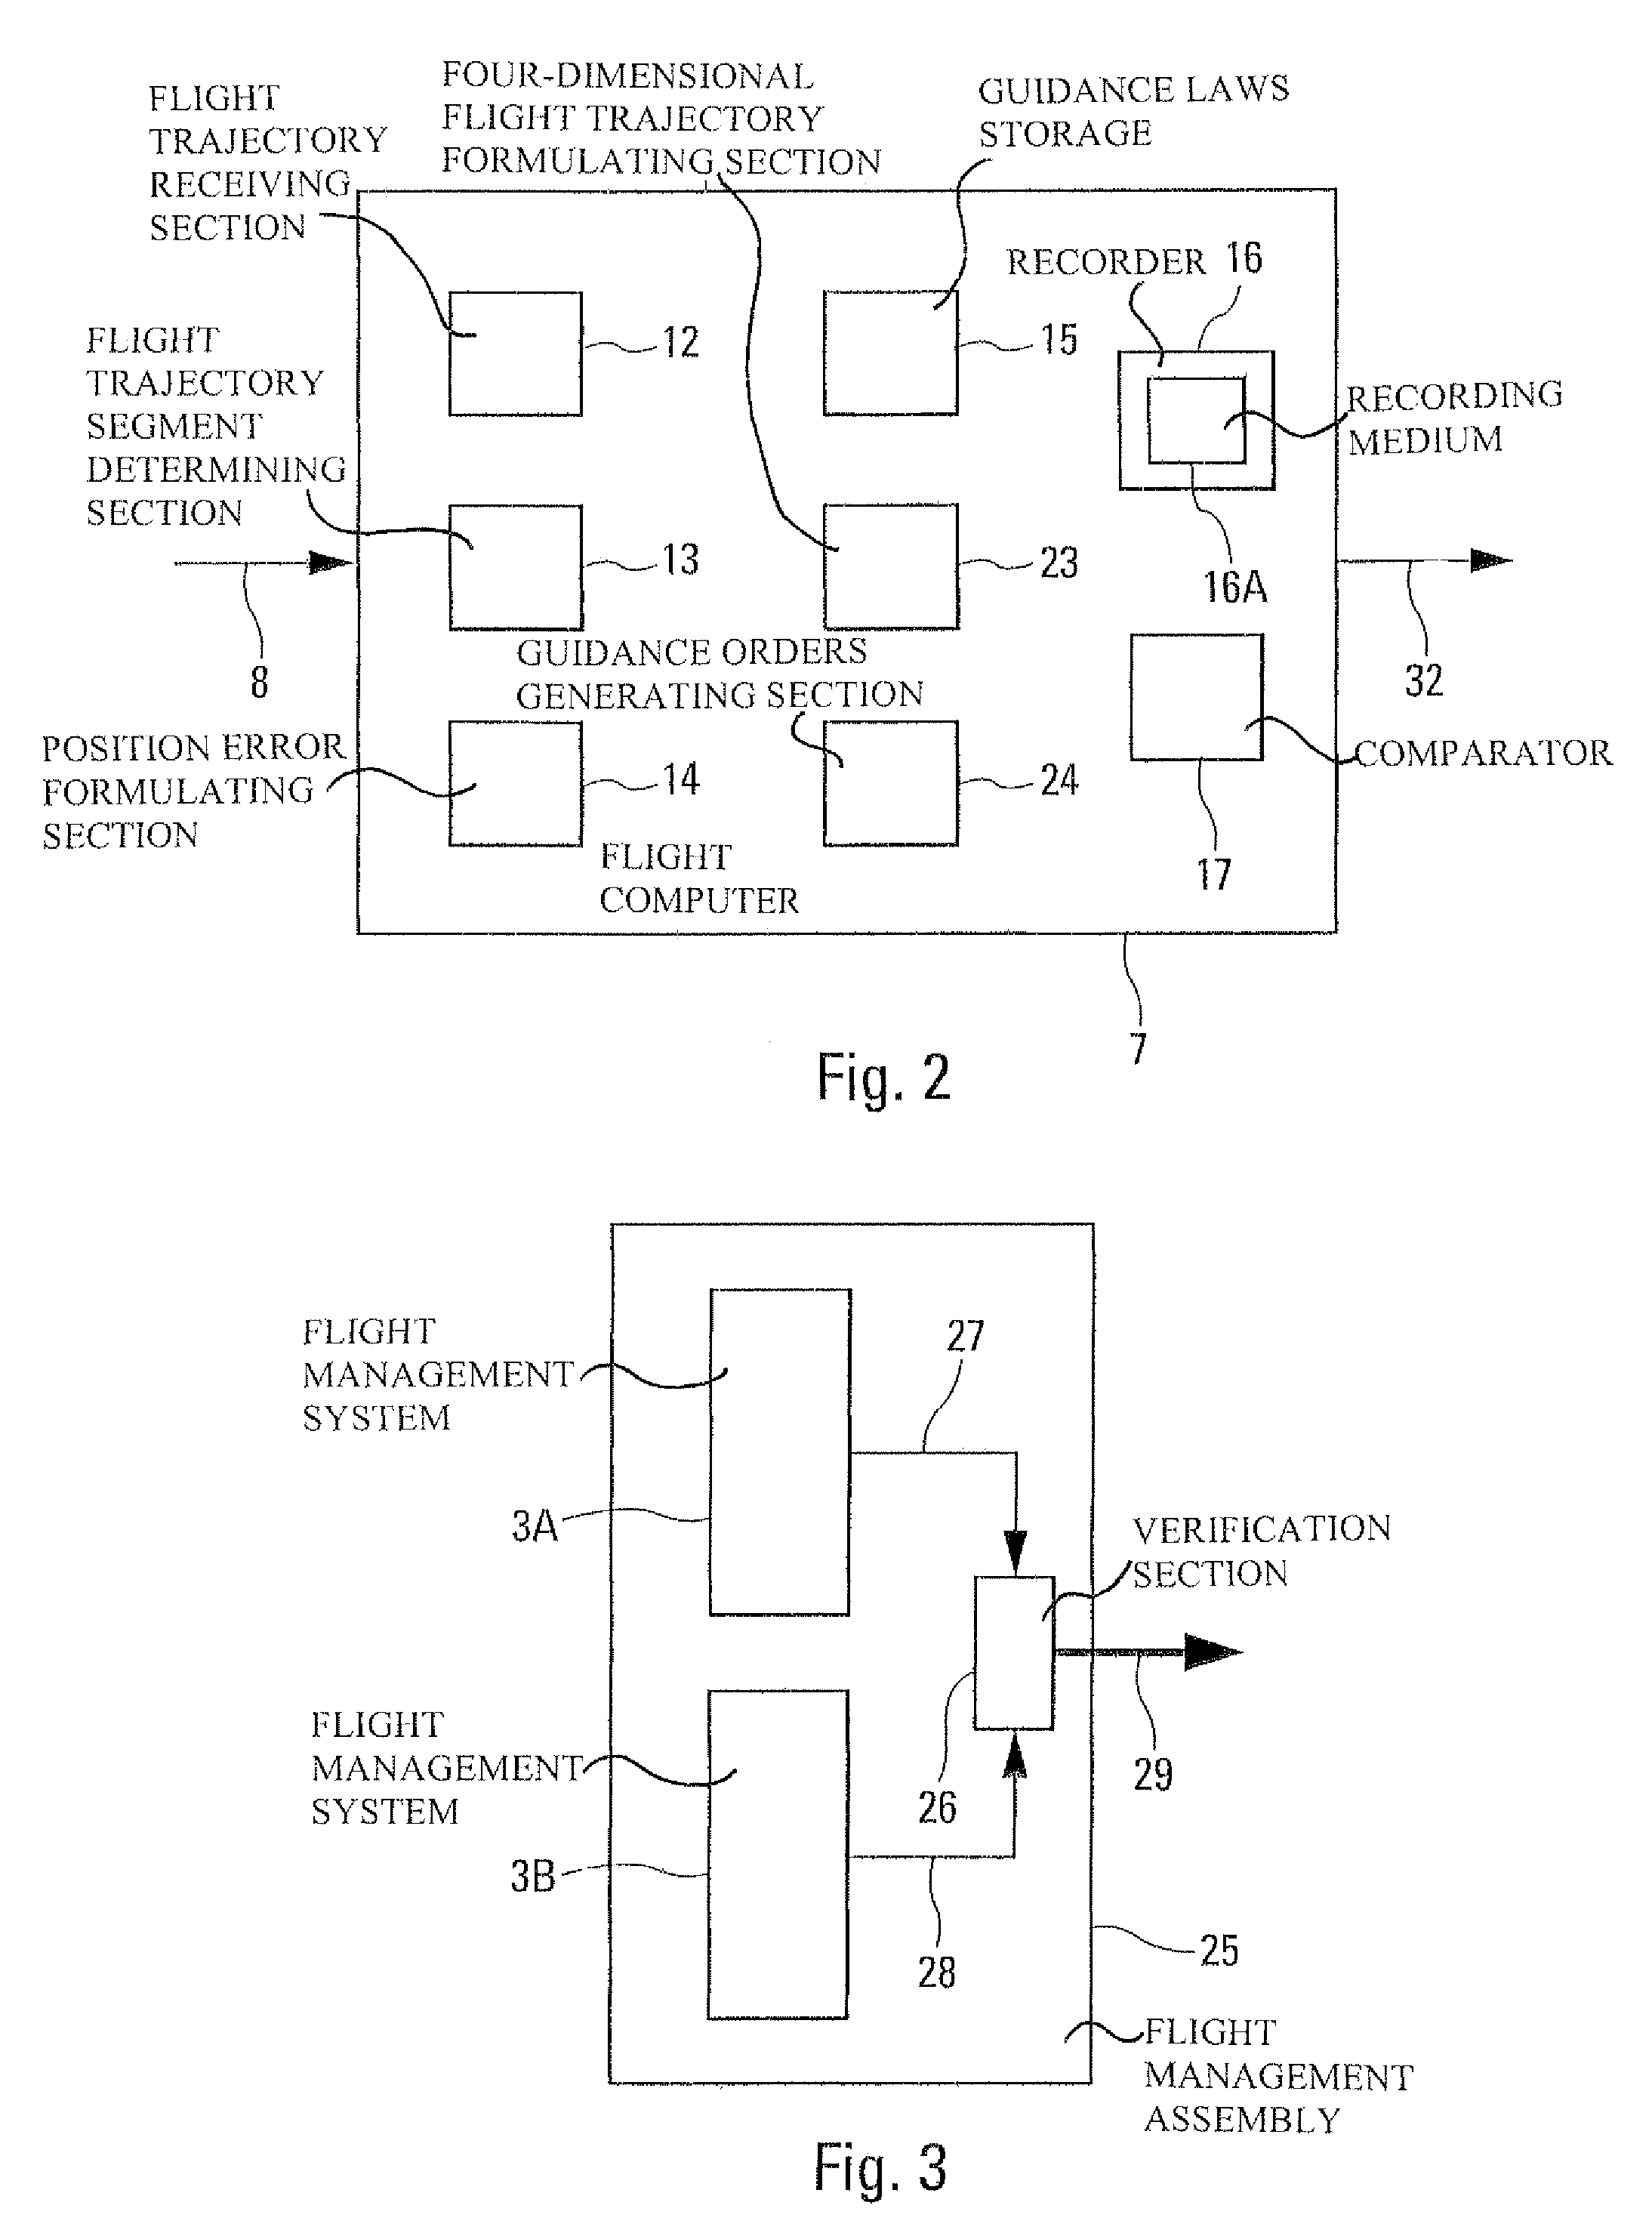 Device for guiding an aircraft along a flight trajectory